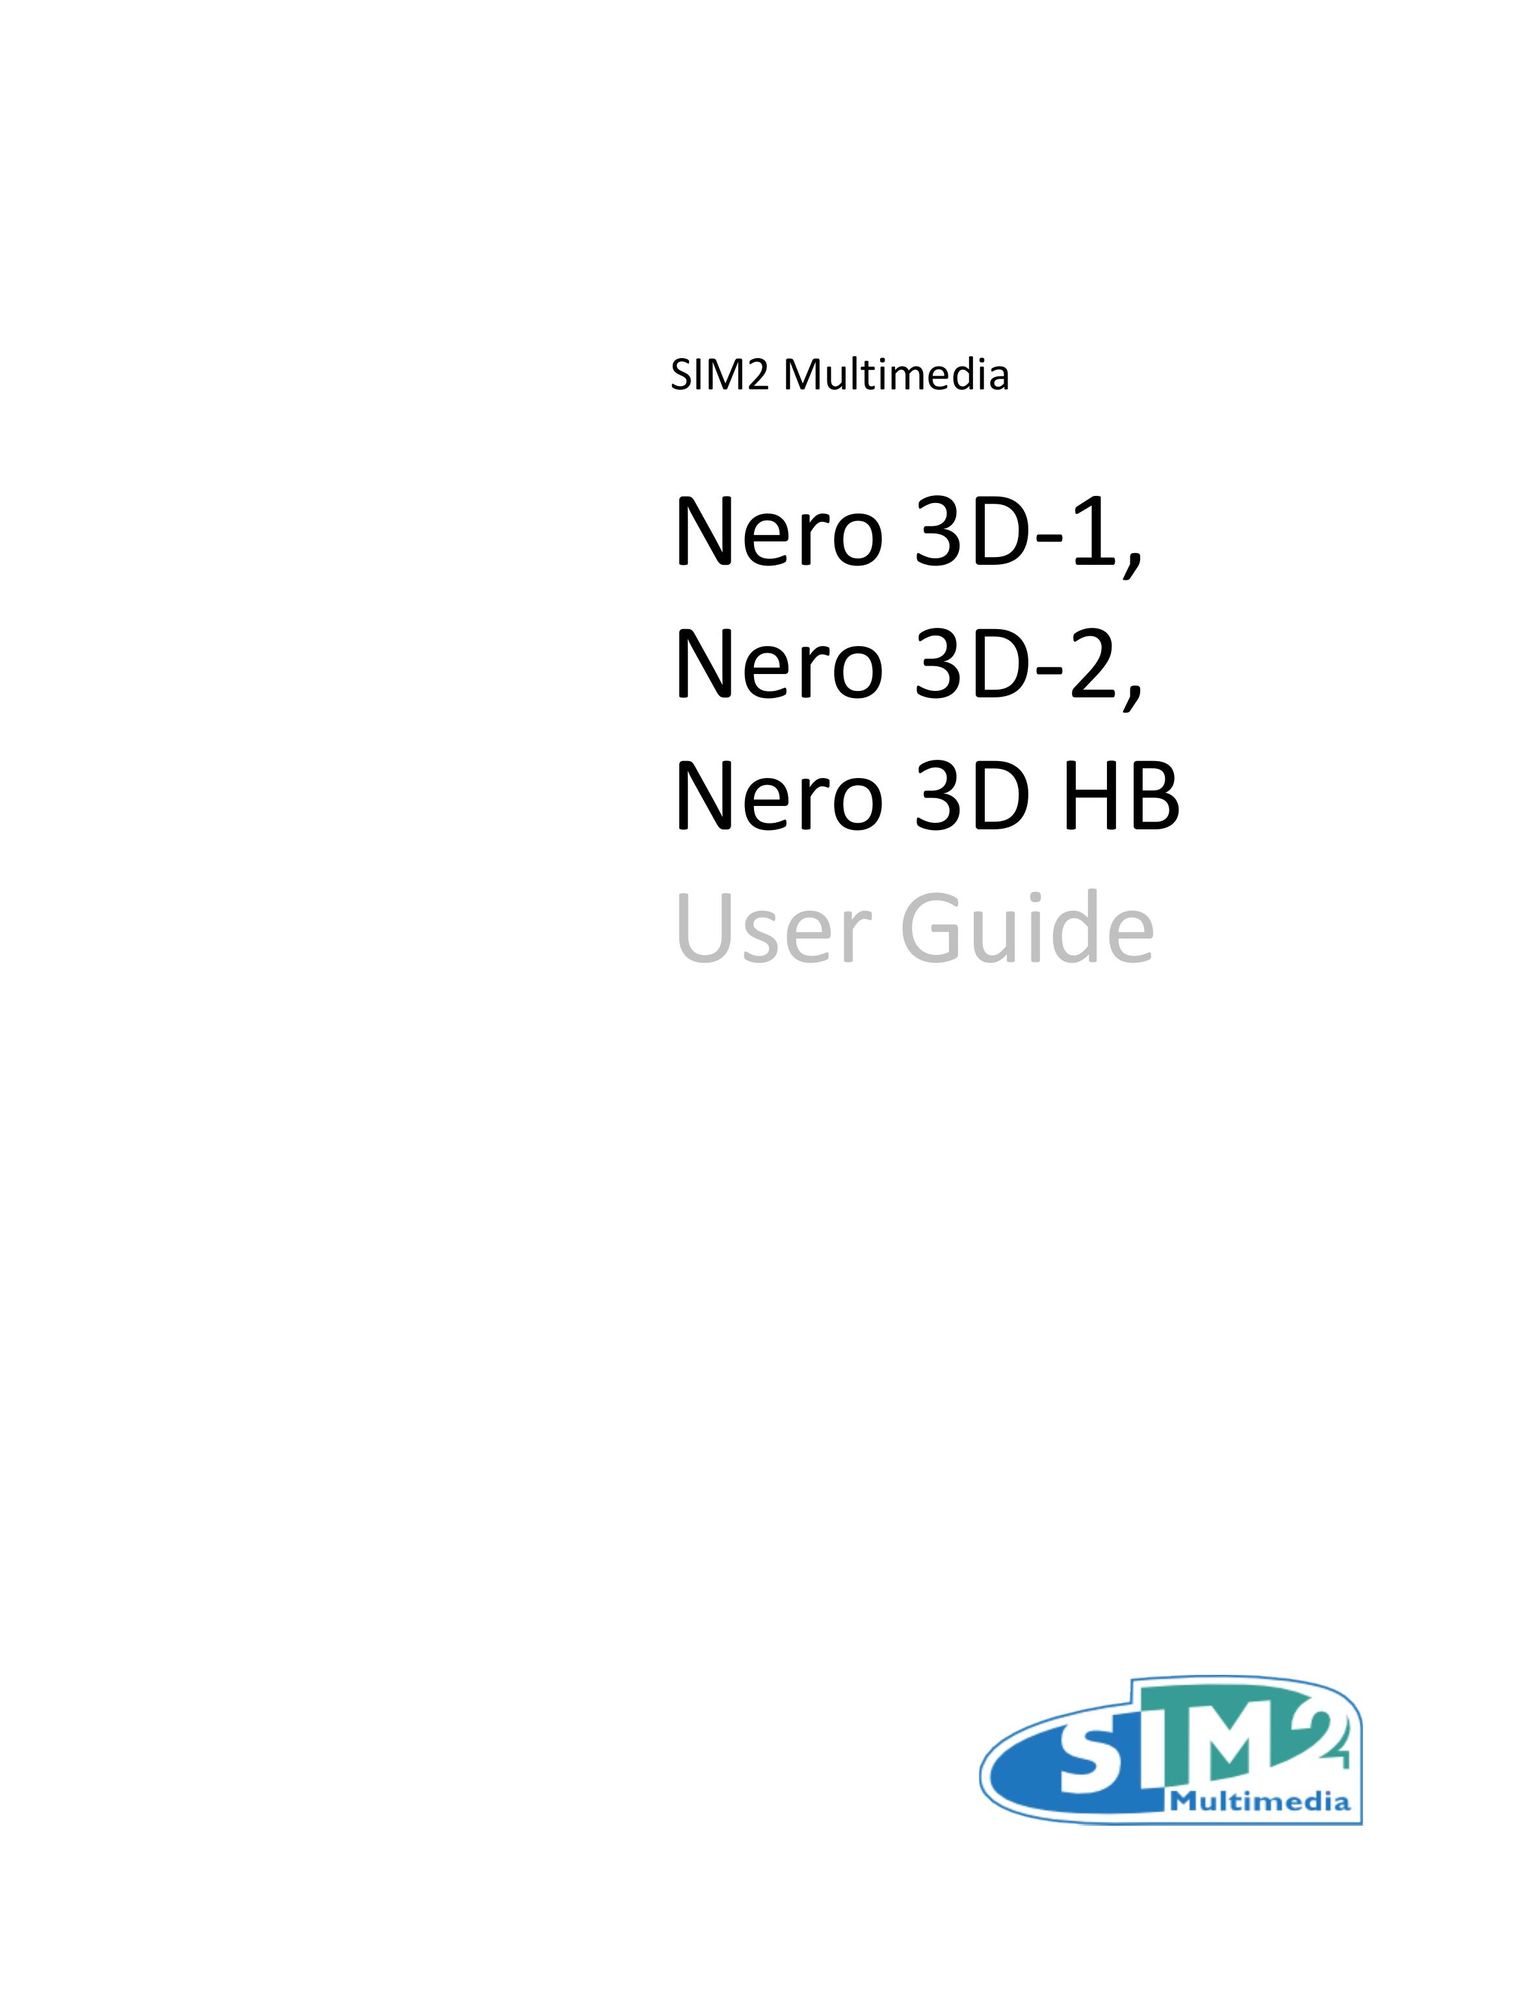 Sim2 Multimedia NERO 3D HB Projection Television User Manual